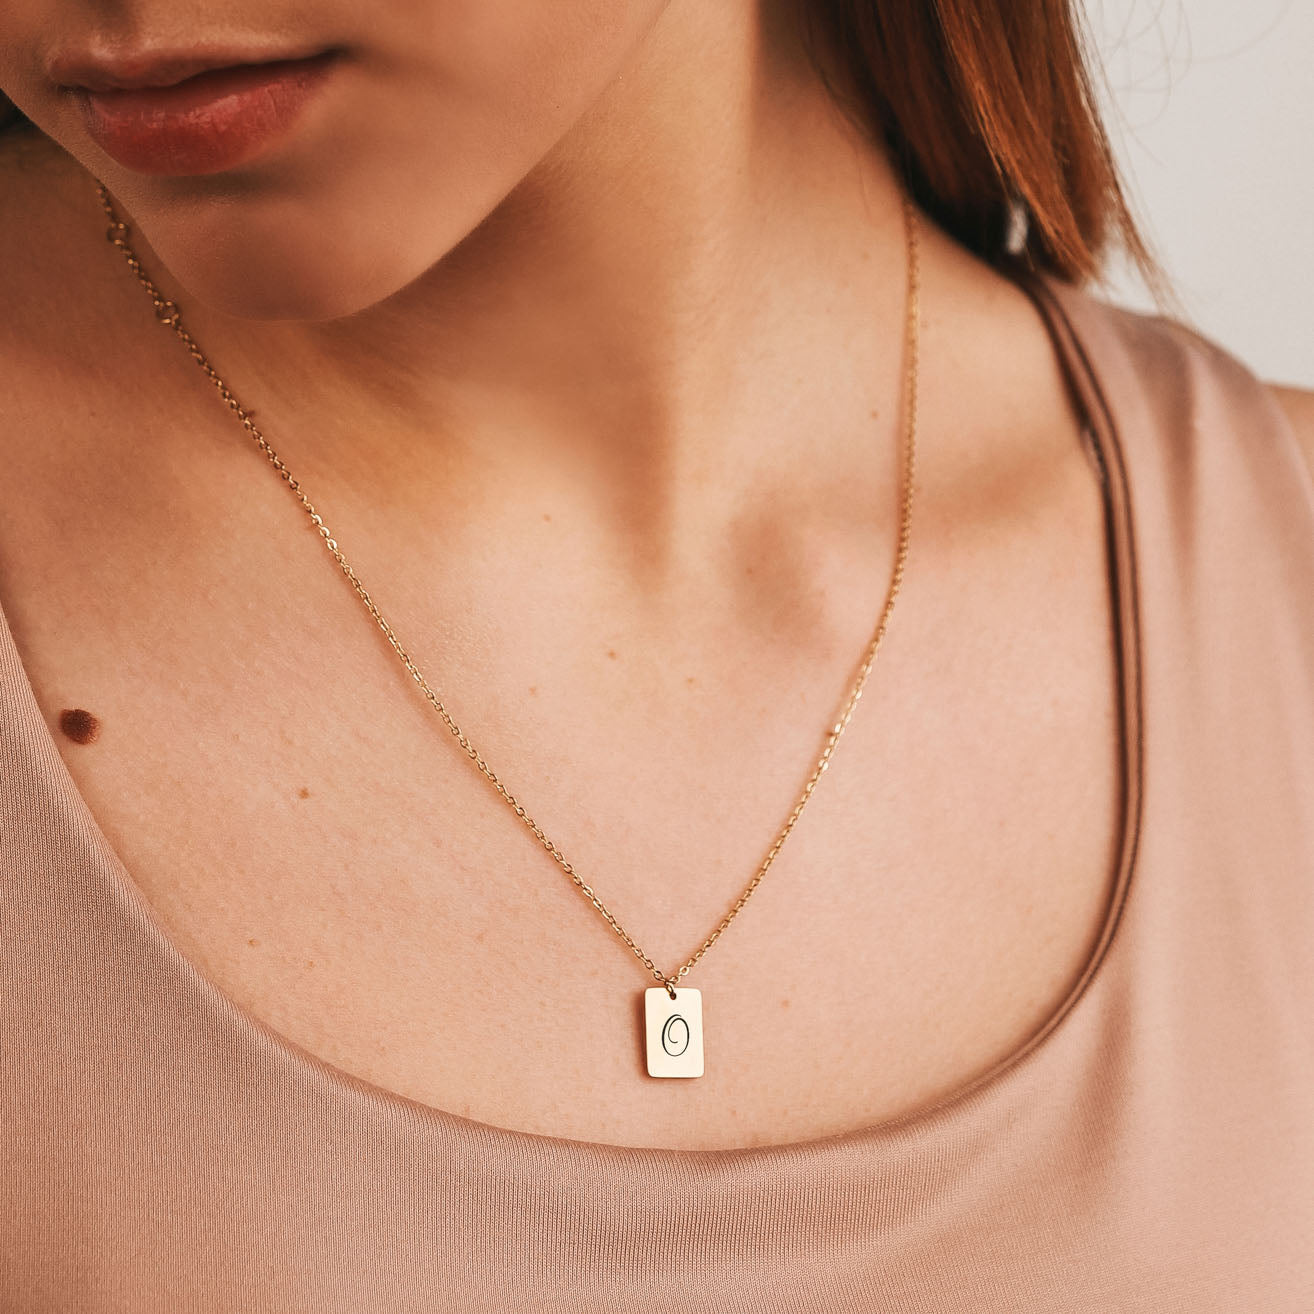 Buy Initial Necklace for Mom, Mother Initial Necklace, Initial Pendant  Necklace, Tiny Gold Letter Necklace, Gold Initial Necklace Name Necklace  Online in India - Etsy